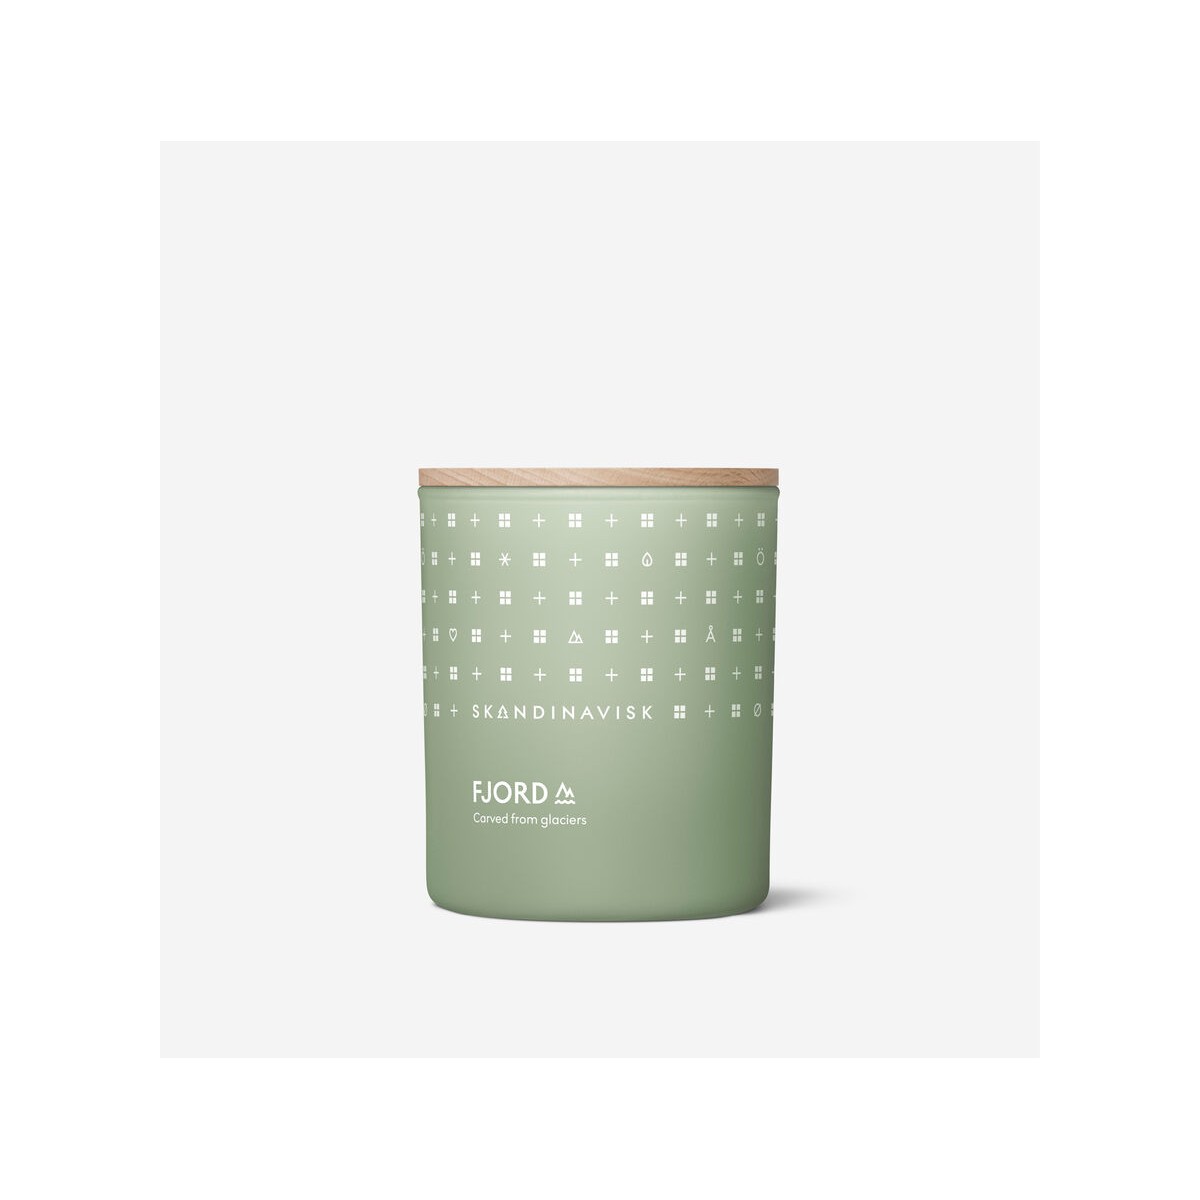 Scented candle - FJORD - 200g